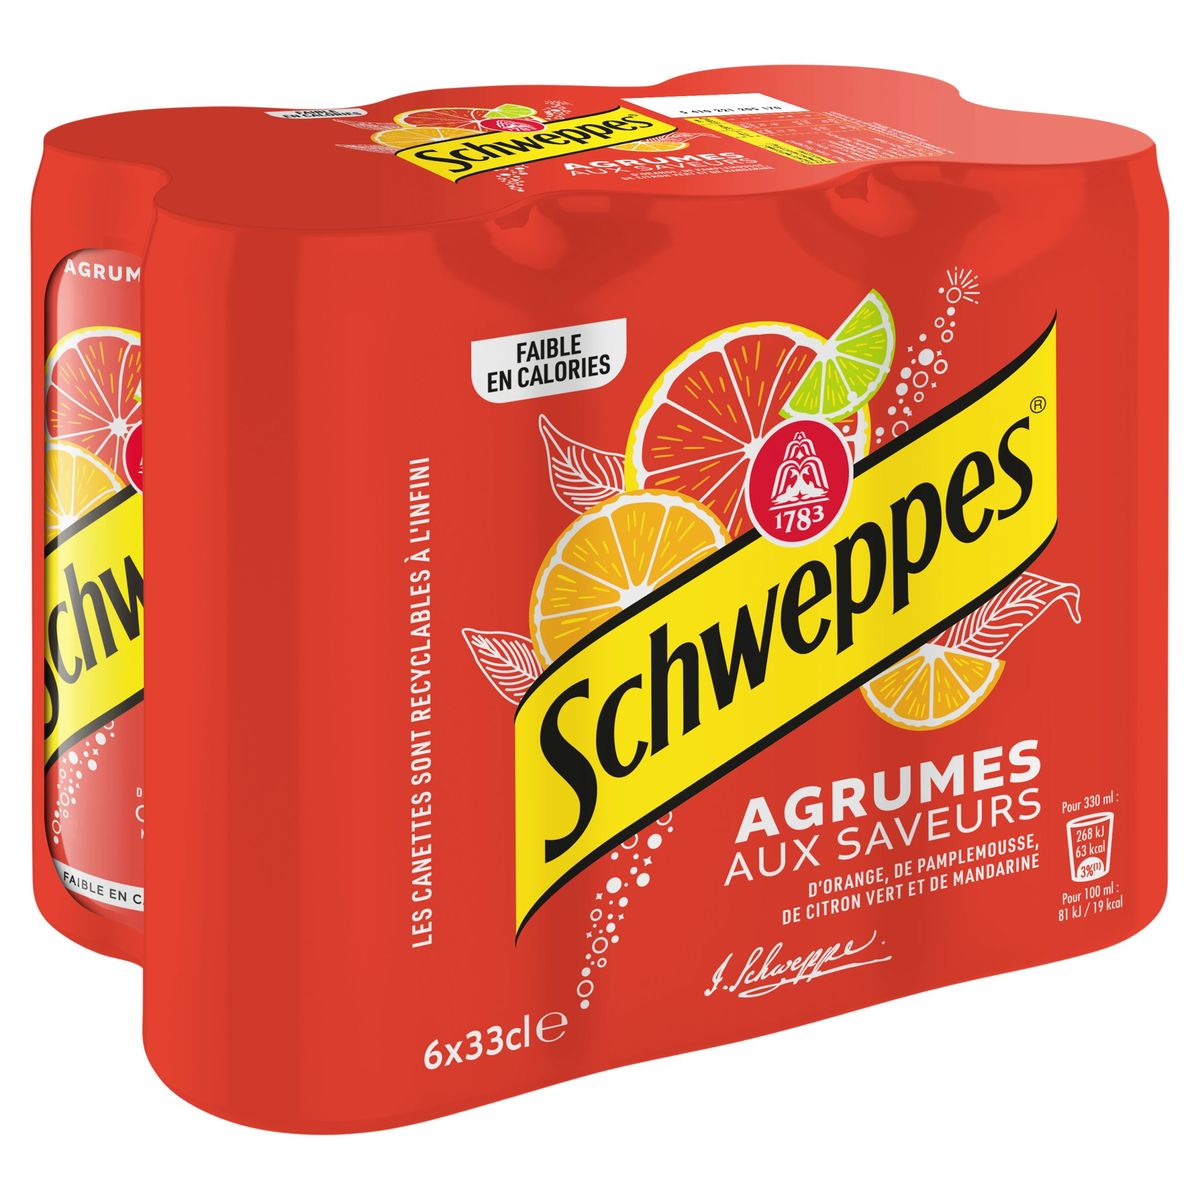 Schweppes Agrumes 6x33cl